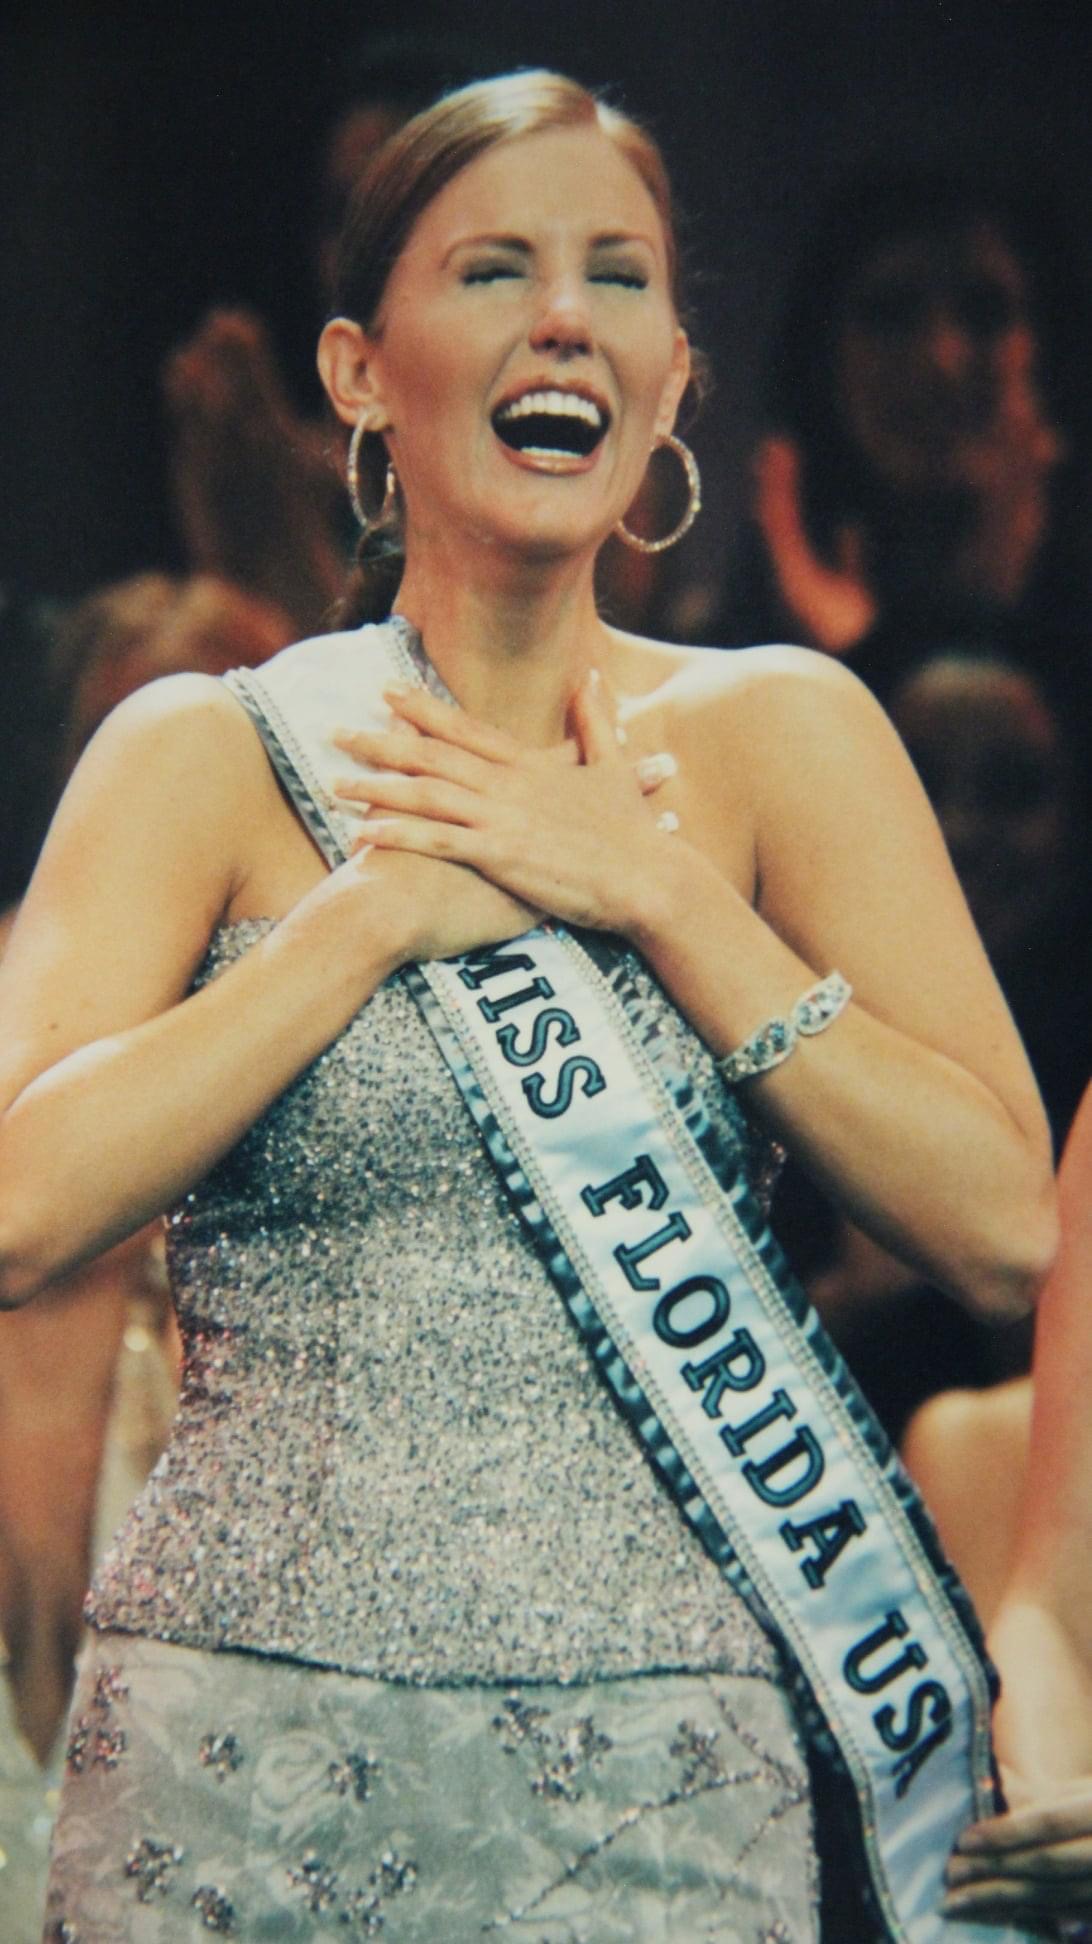 Miss-Florida-USA-2002-pageant-21